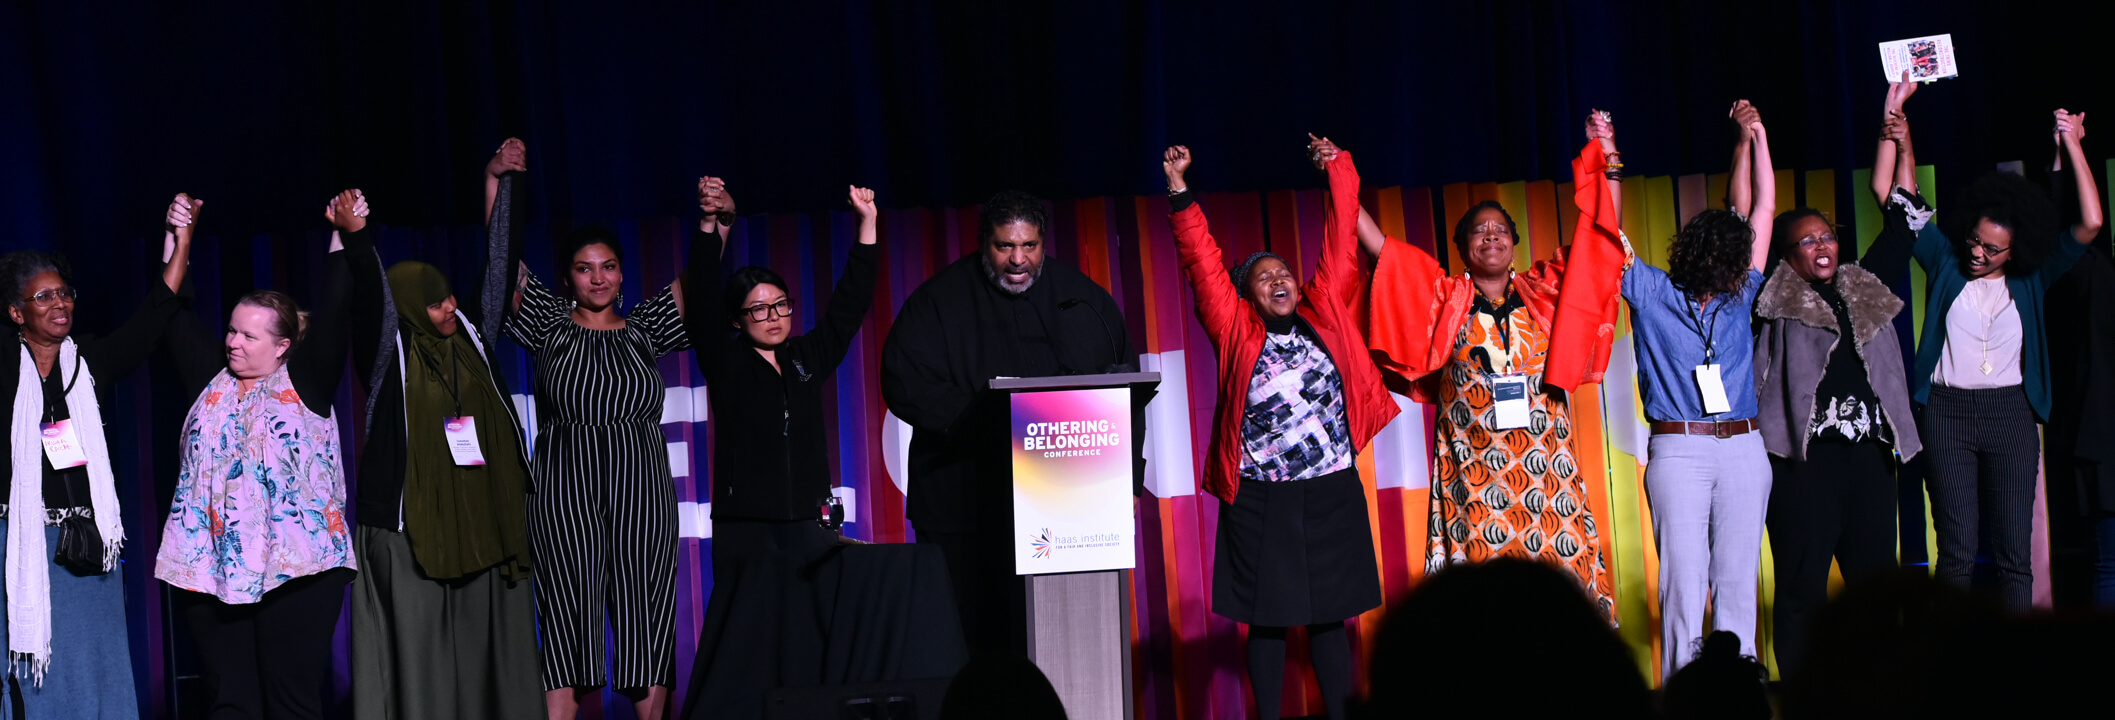 Rev. William Barber II closes out the 2019 Othering &amp; Belonging Conference with a call to the stage of all who have experienced being treated as “other” and and a call of action for all who want to move forward together towards belonging.